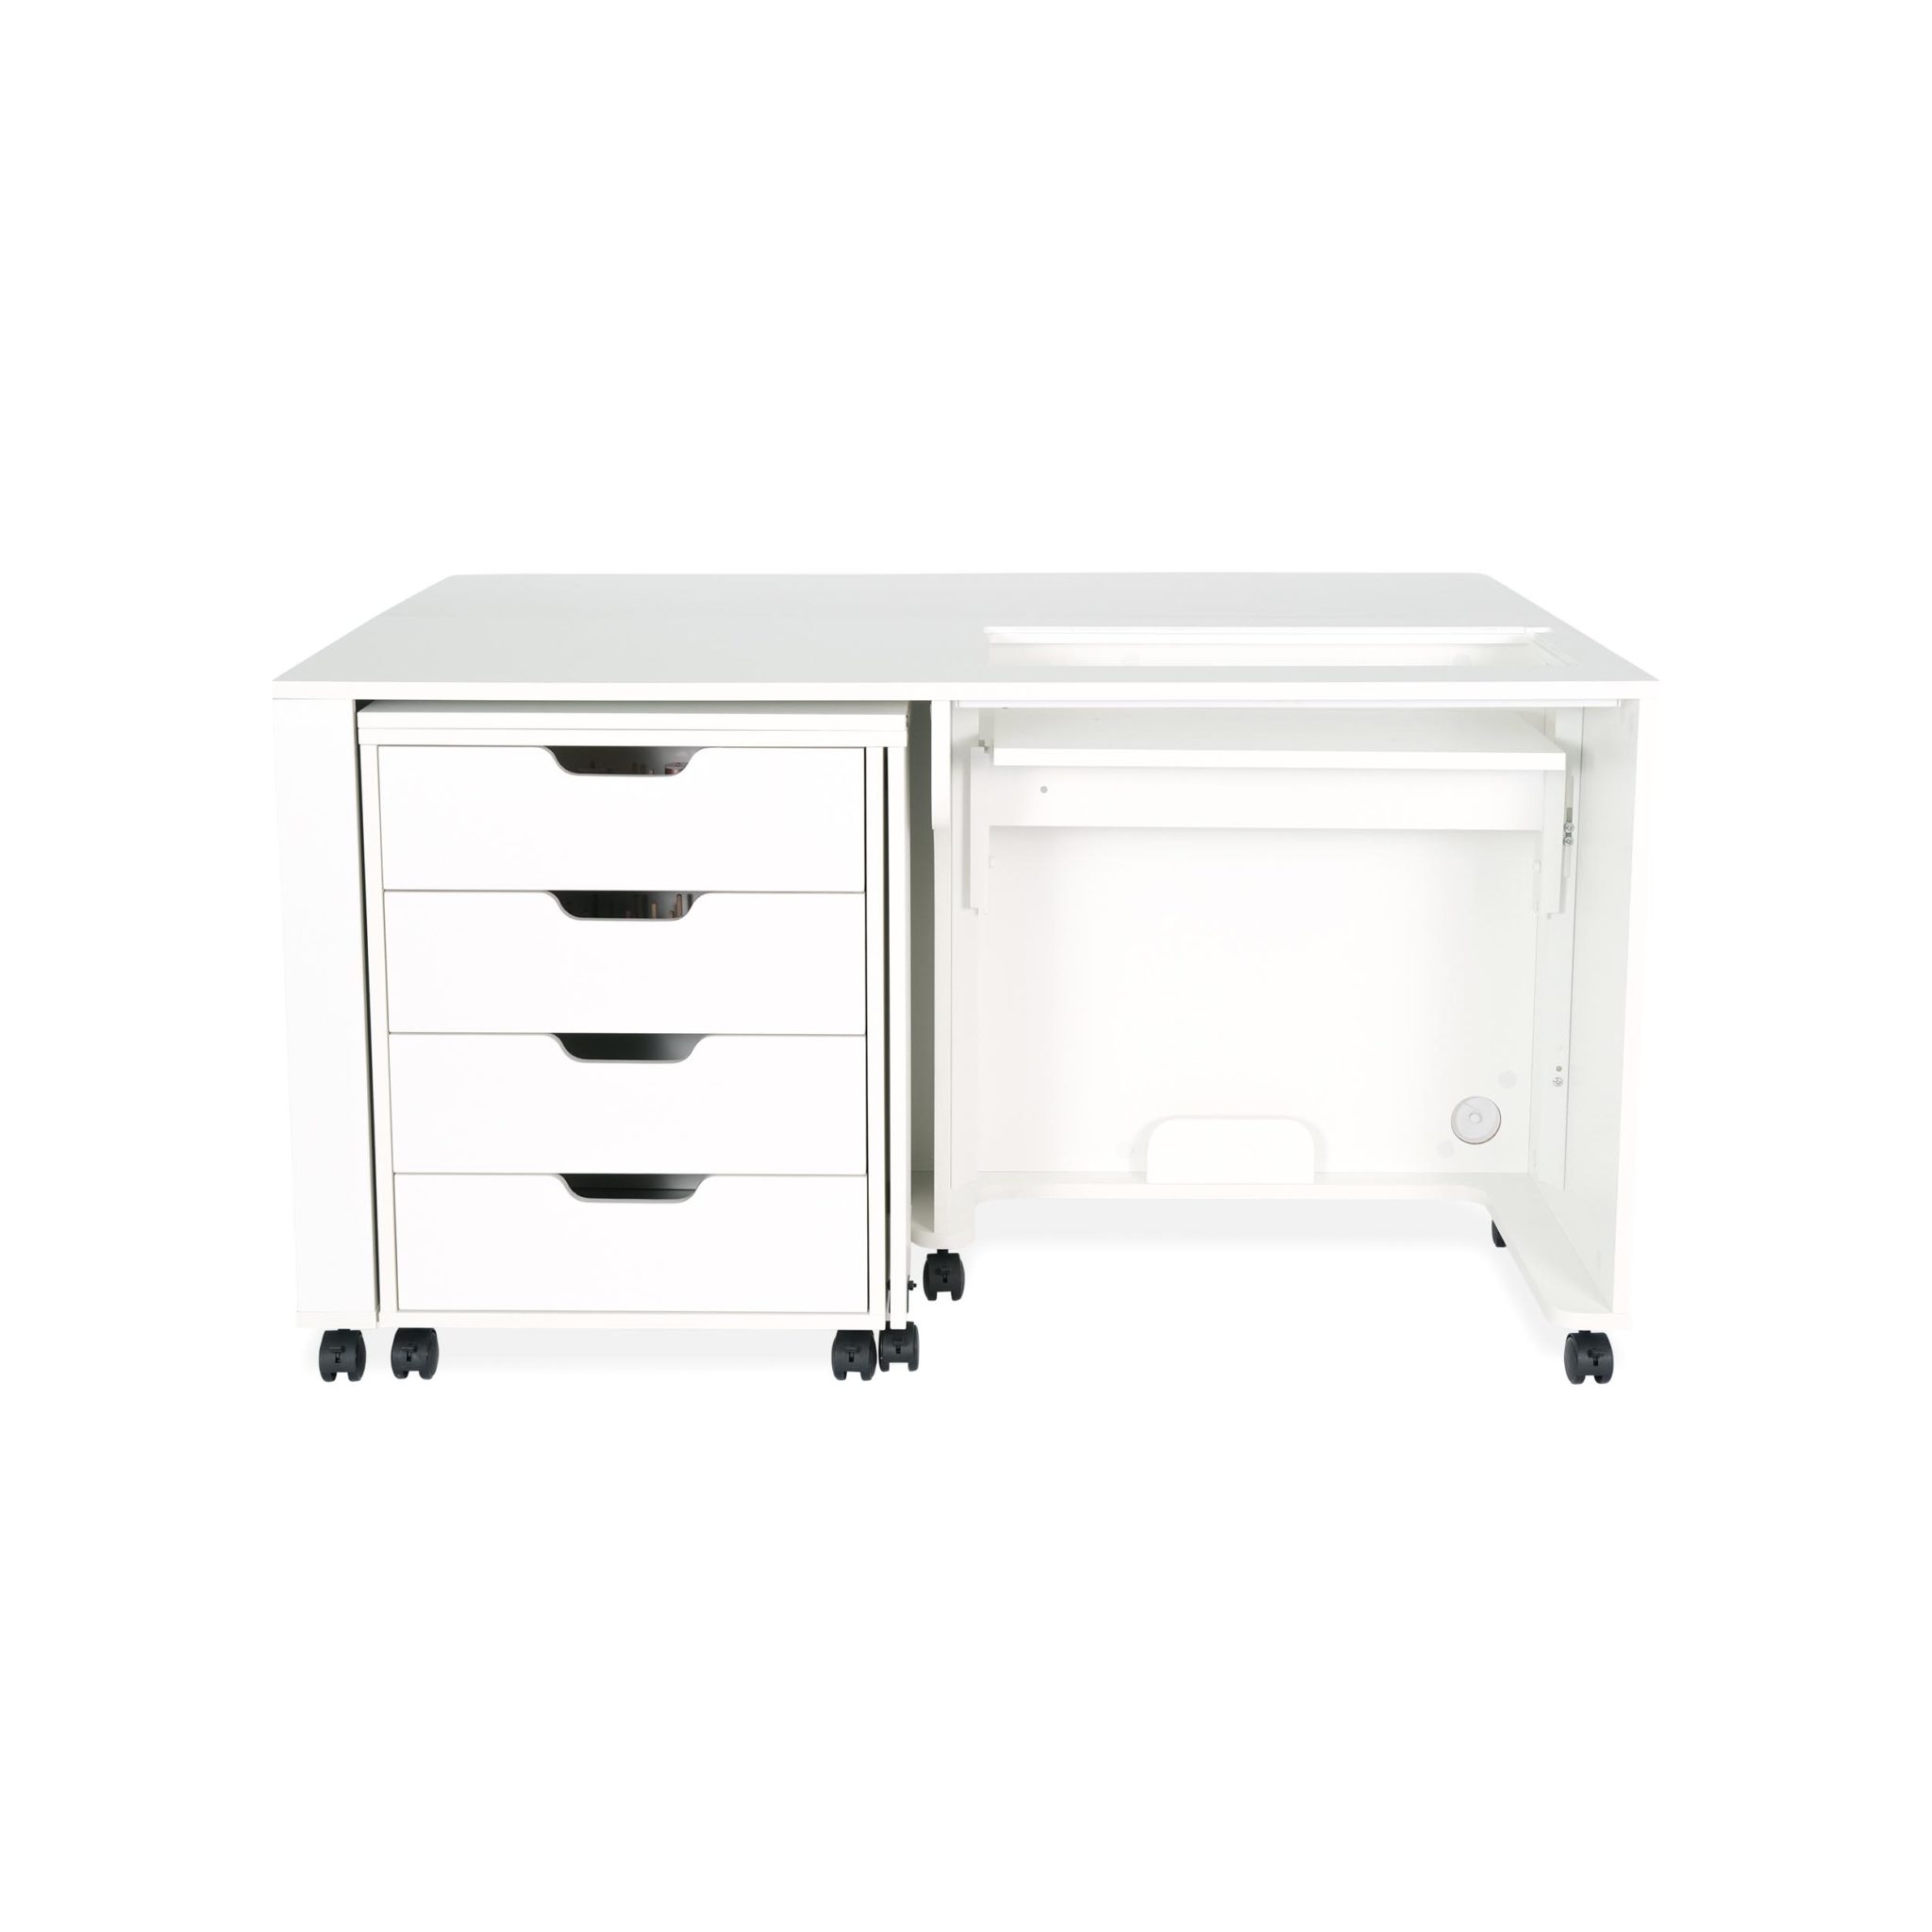 Laverne and Shirley Sewing Cabinet features a 3-position hydraulic lift to accommodate up to a 55 lb machine, a foldable quilt leaf, heavy-duty casters for easy mobility, 4 storage drawers, and a built-in ironing and cutting station.